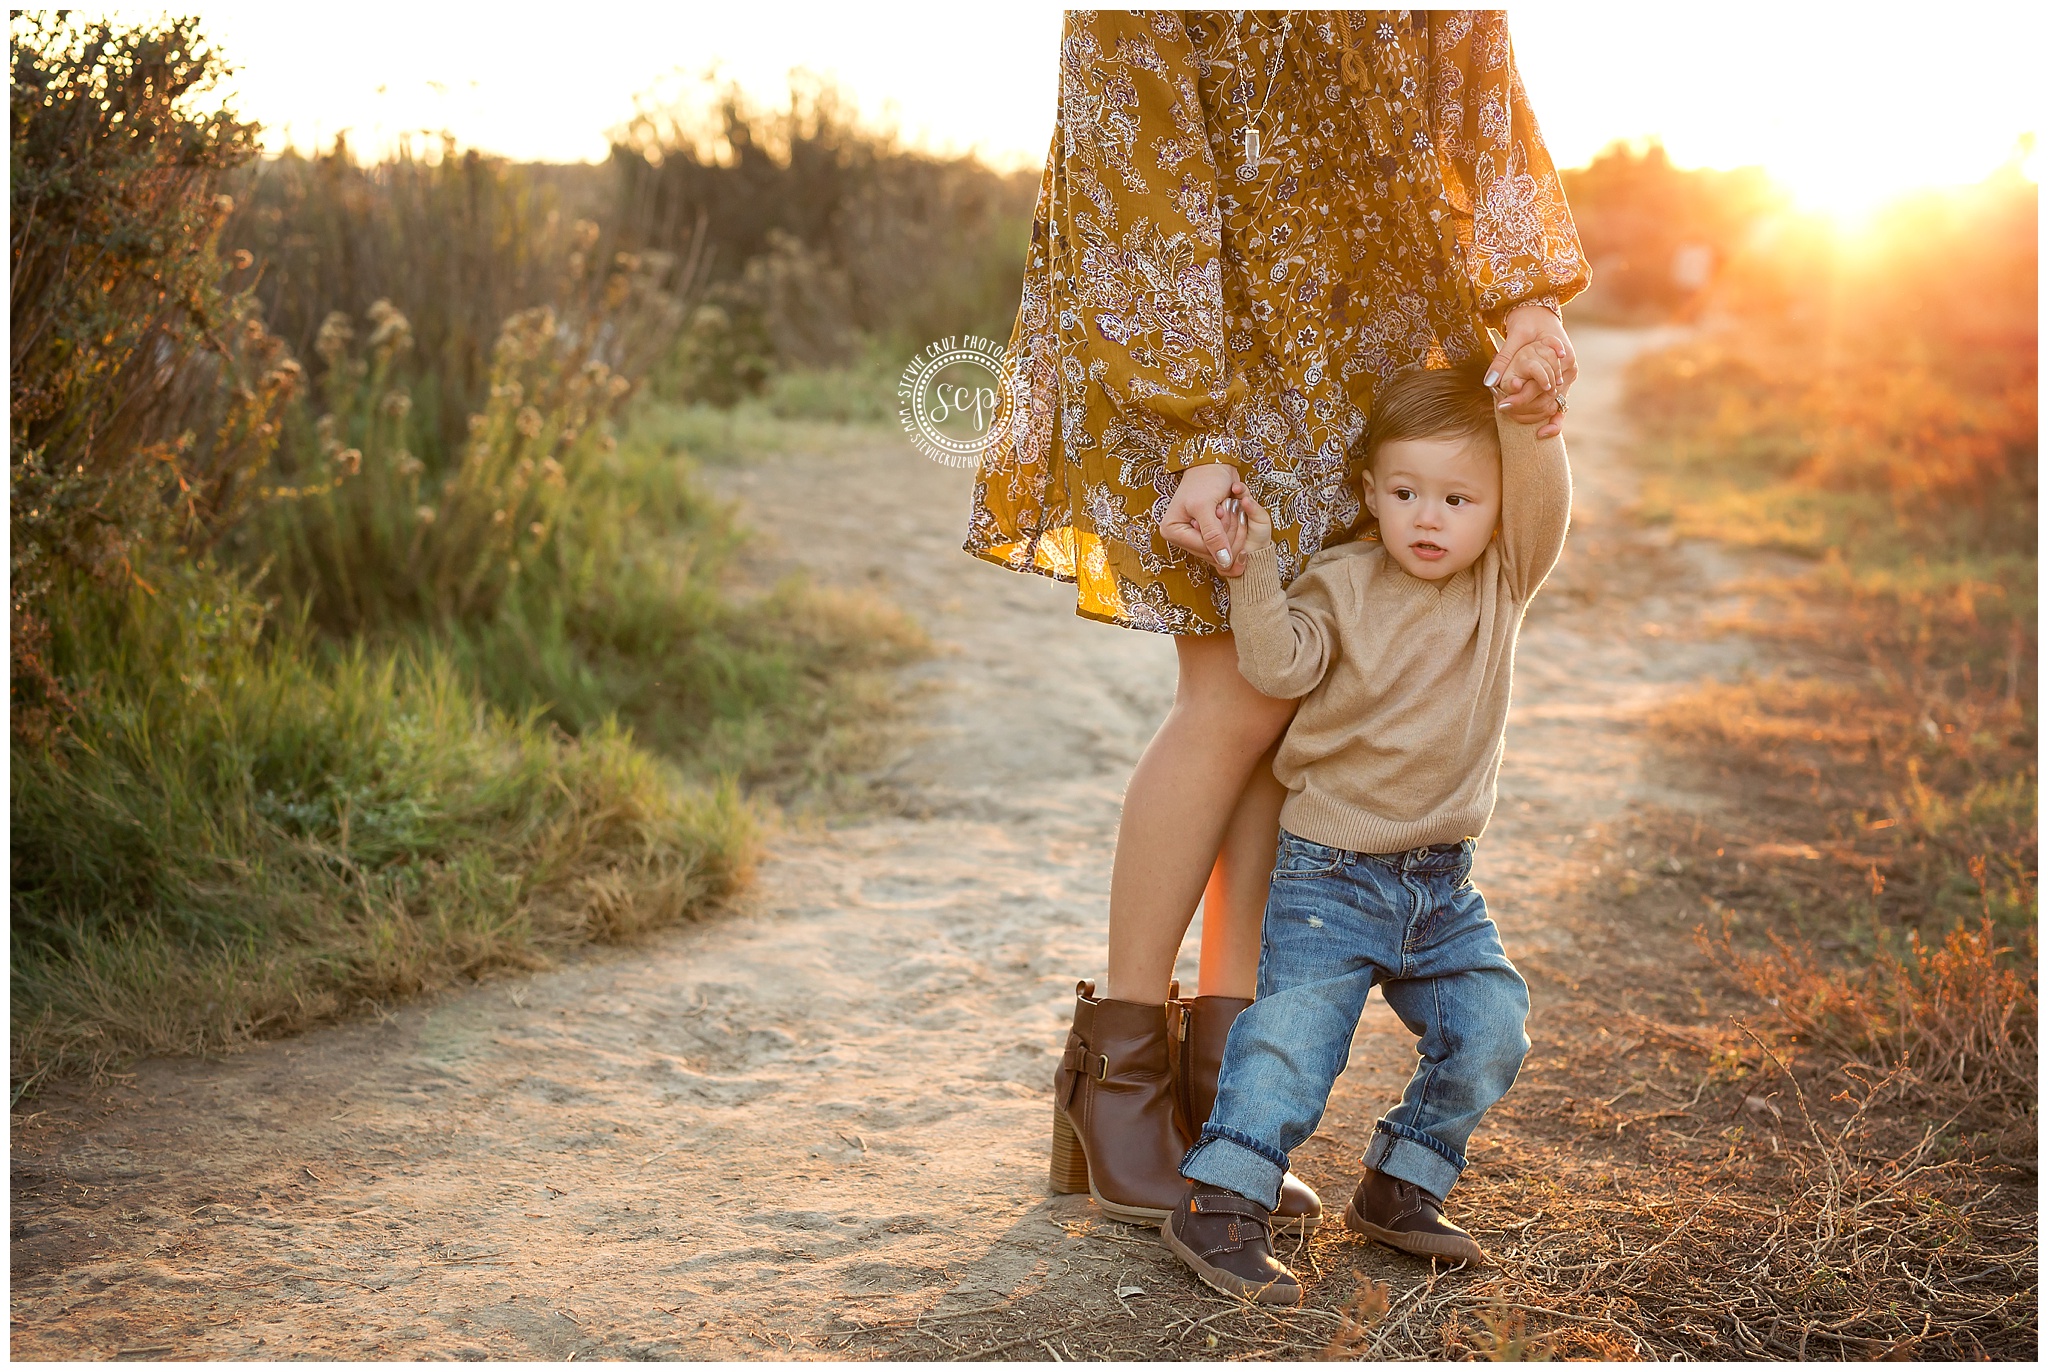 Love this free people style for fall family photos. Family photography by Stevie Cruz Photography.